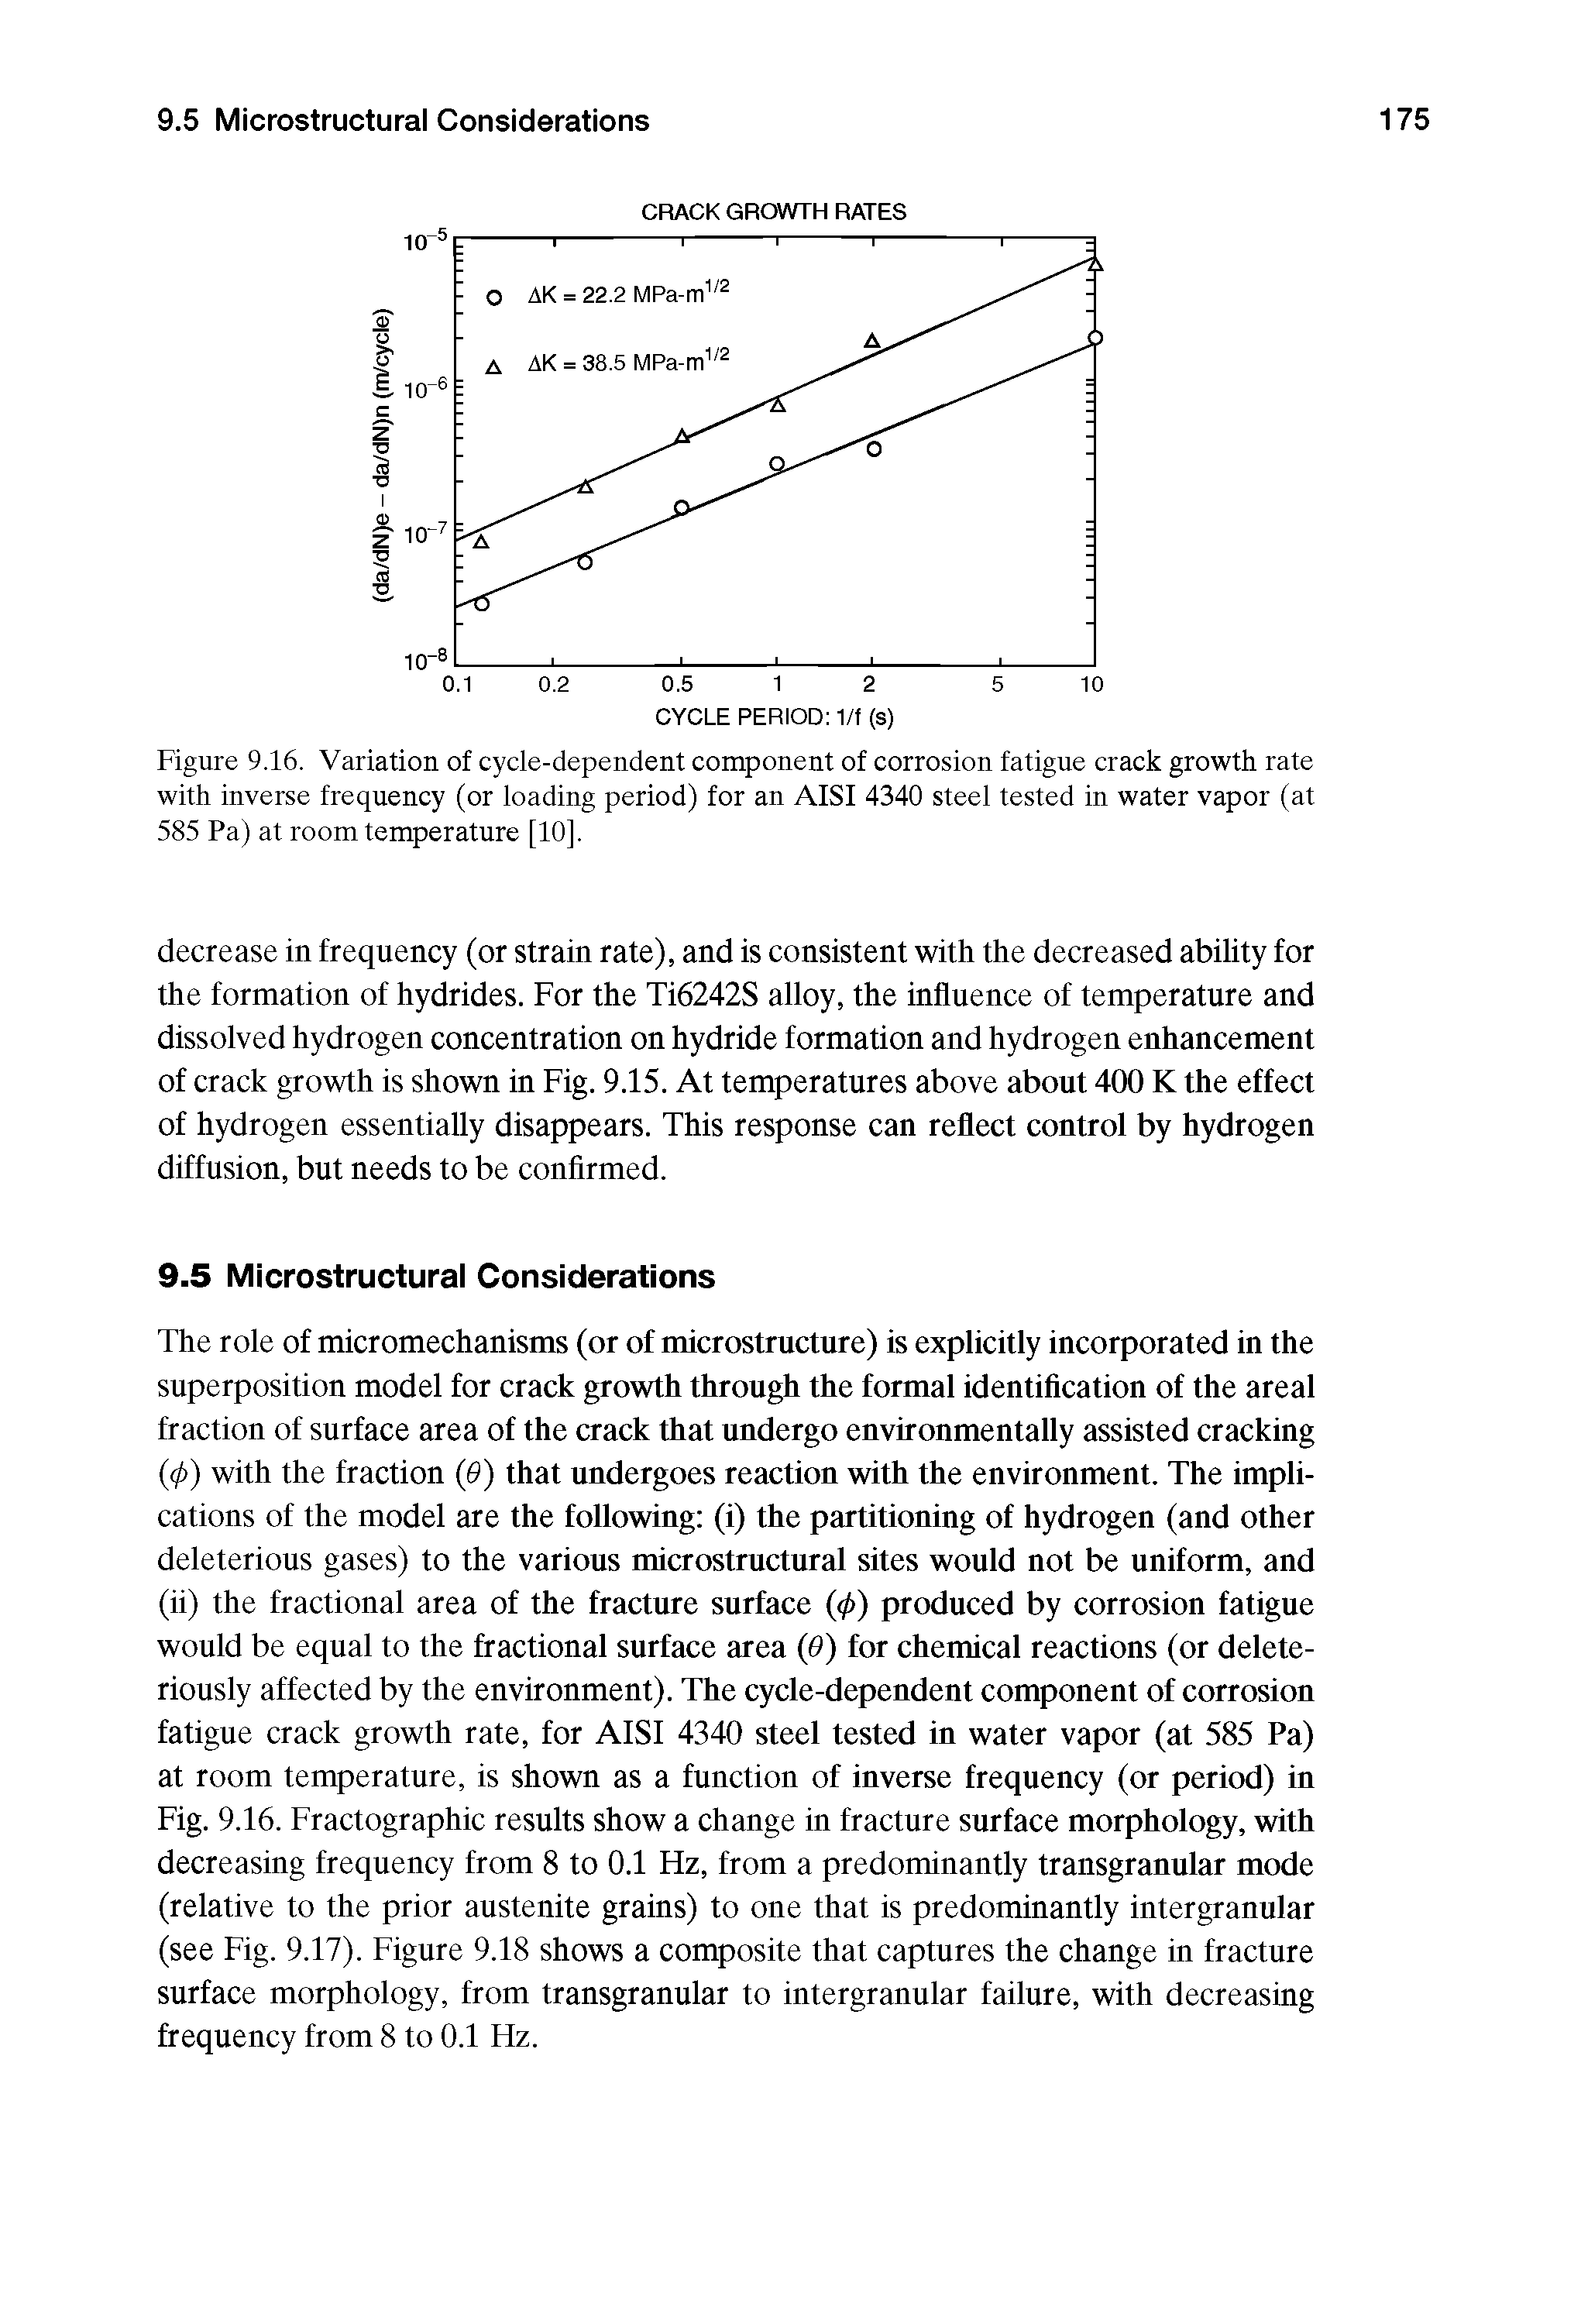 Figure 9.16. Variation of cycle-dependent component of corrosion fatigue crack growth rate with inverse frequency (or loading period) for an AISI 4340 steel tested in water vapor (at 585 Pa) at room temperature [10].